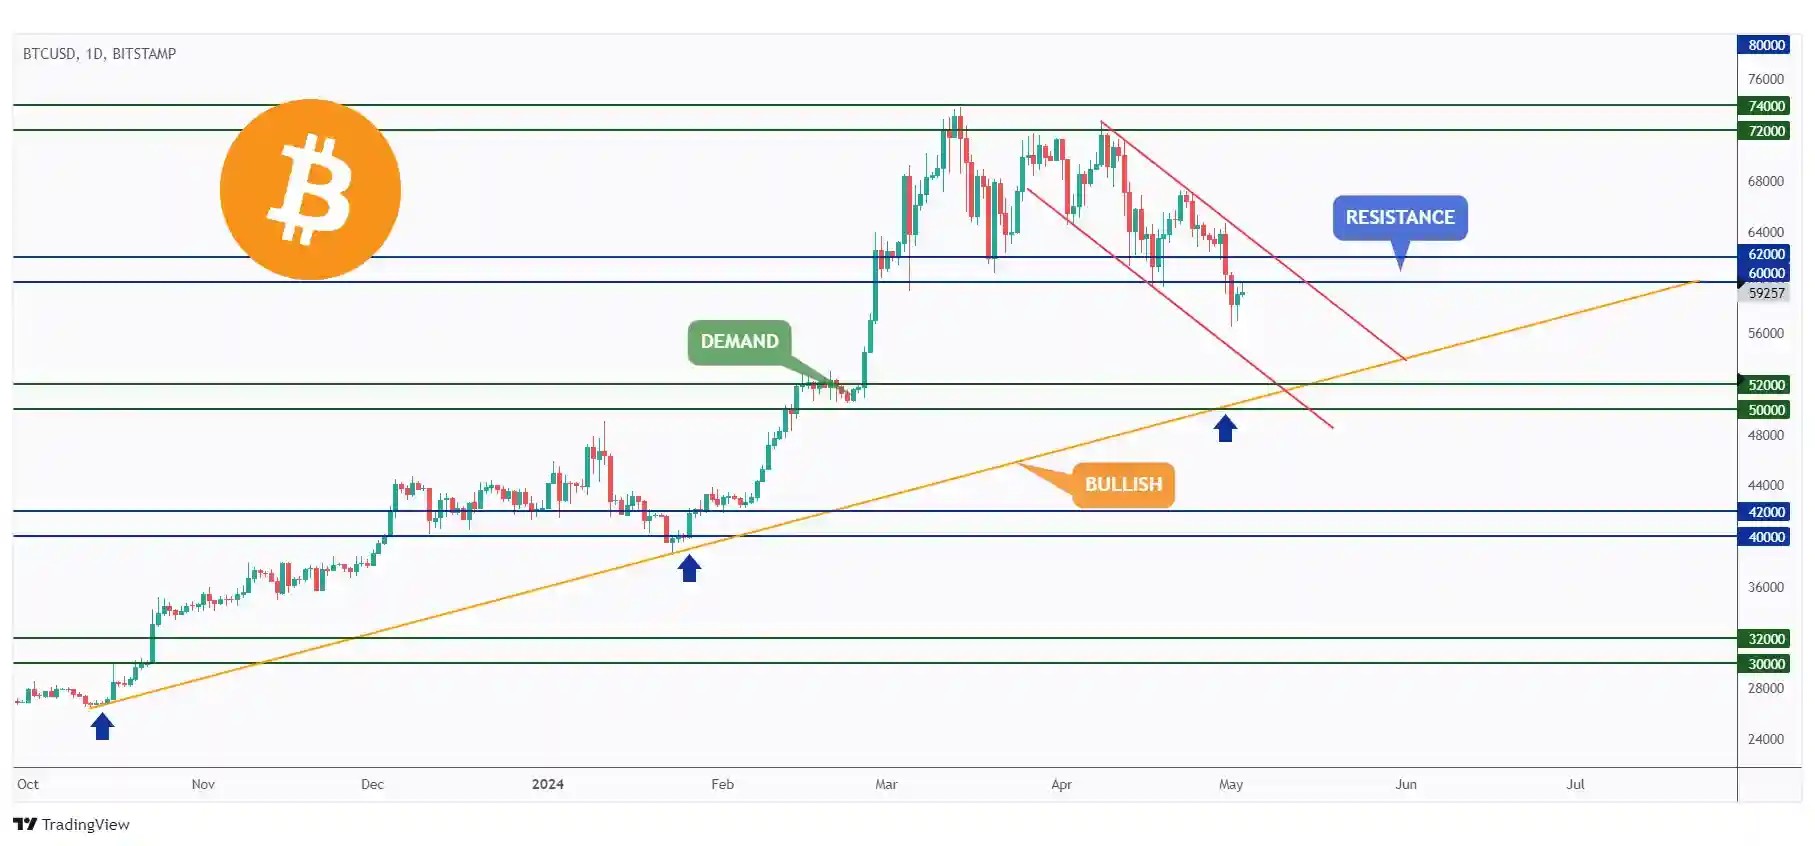 BTC daily chart overall bearish trading within a falling channel leading to $52,000 as long as the $60,000 resistance holds.